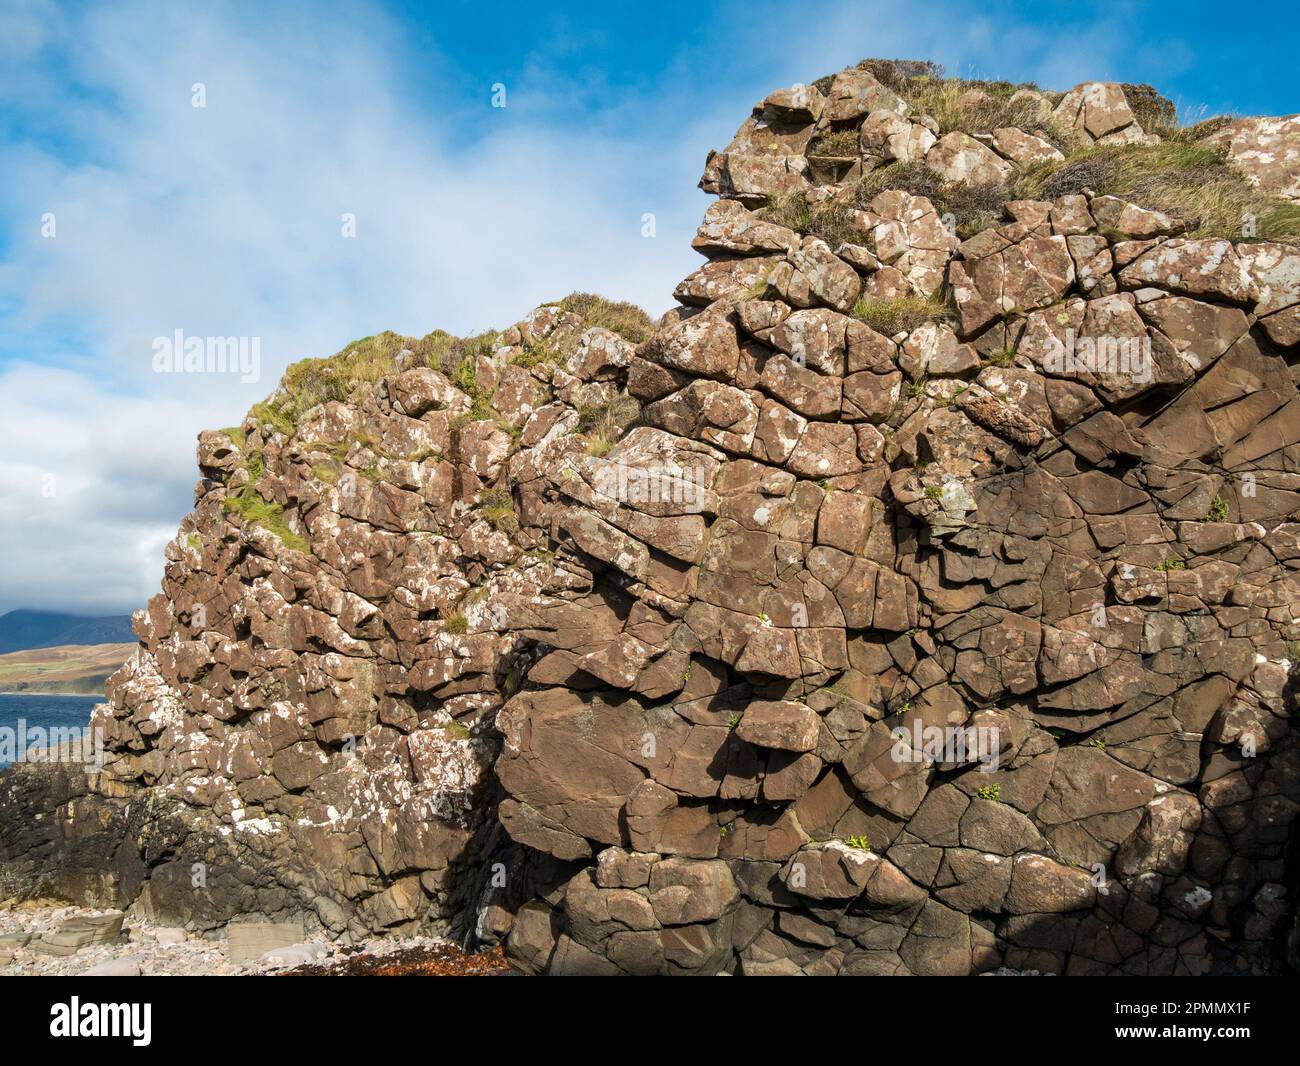 A rock wall formed by the exposed face of a basalt igneous intrusion Paleogene dyke, Tokavaig, Sleat, Isle of Skye, Scotland. Stock Photo